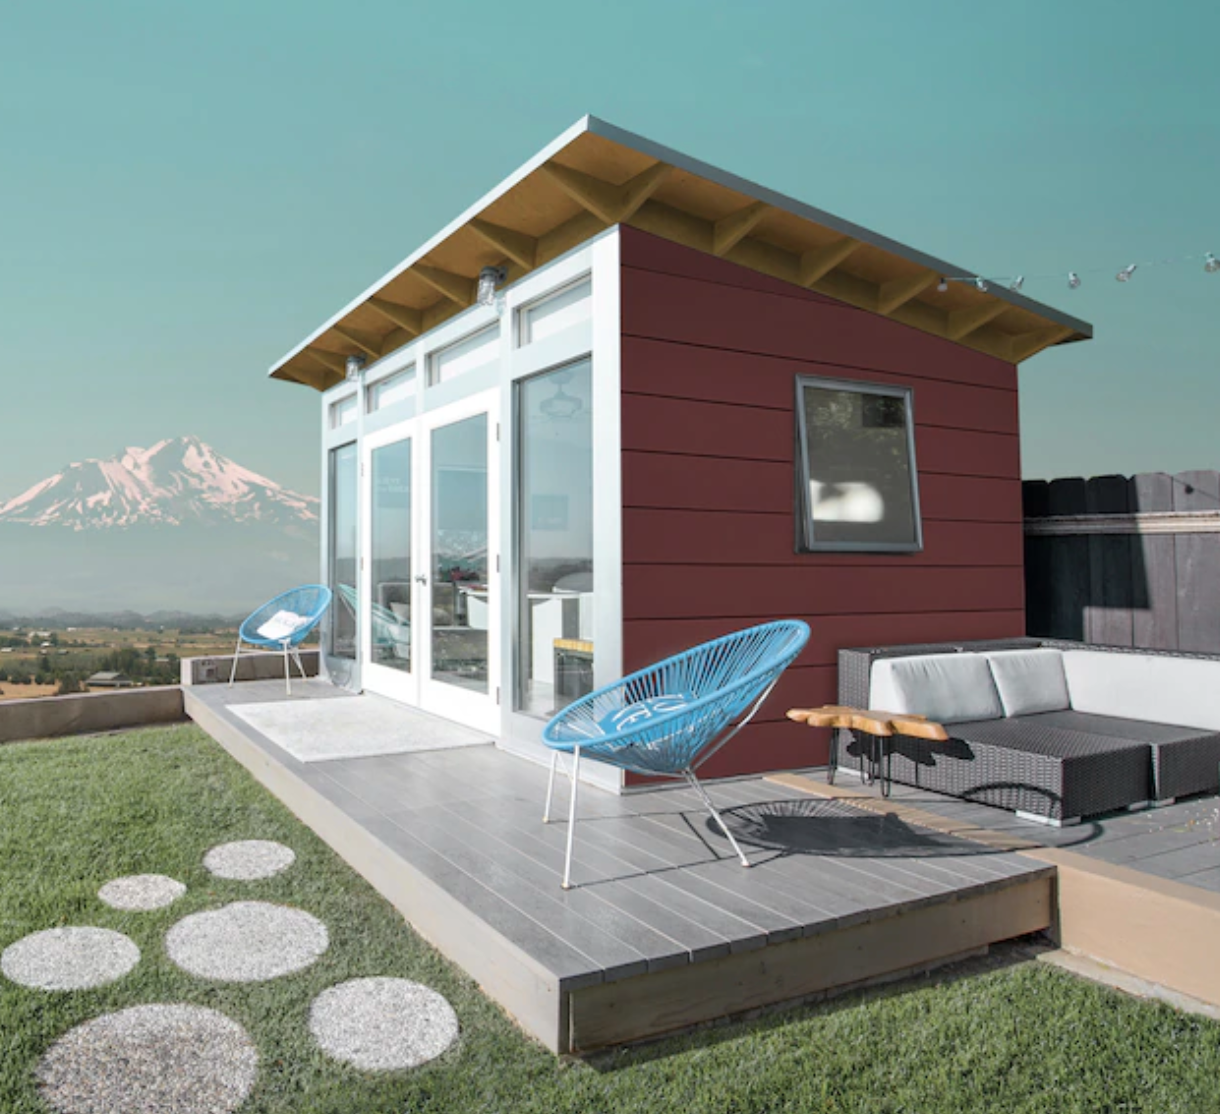 https://www.simplemost.com/wp-content/uploads/2020/06/lowes-tiny-home-kit.png